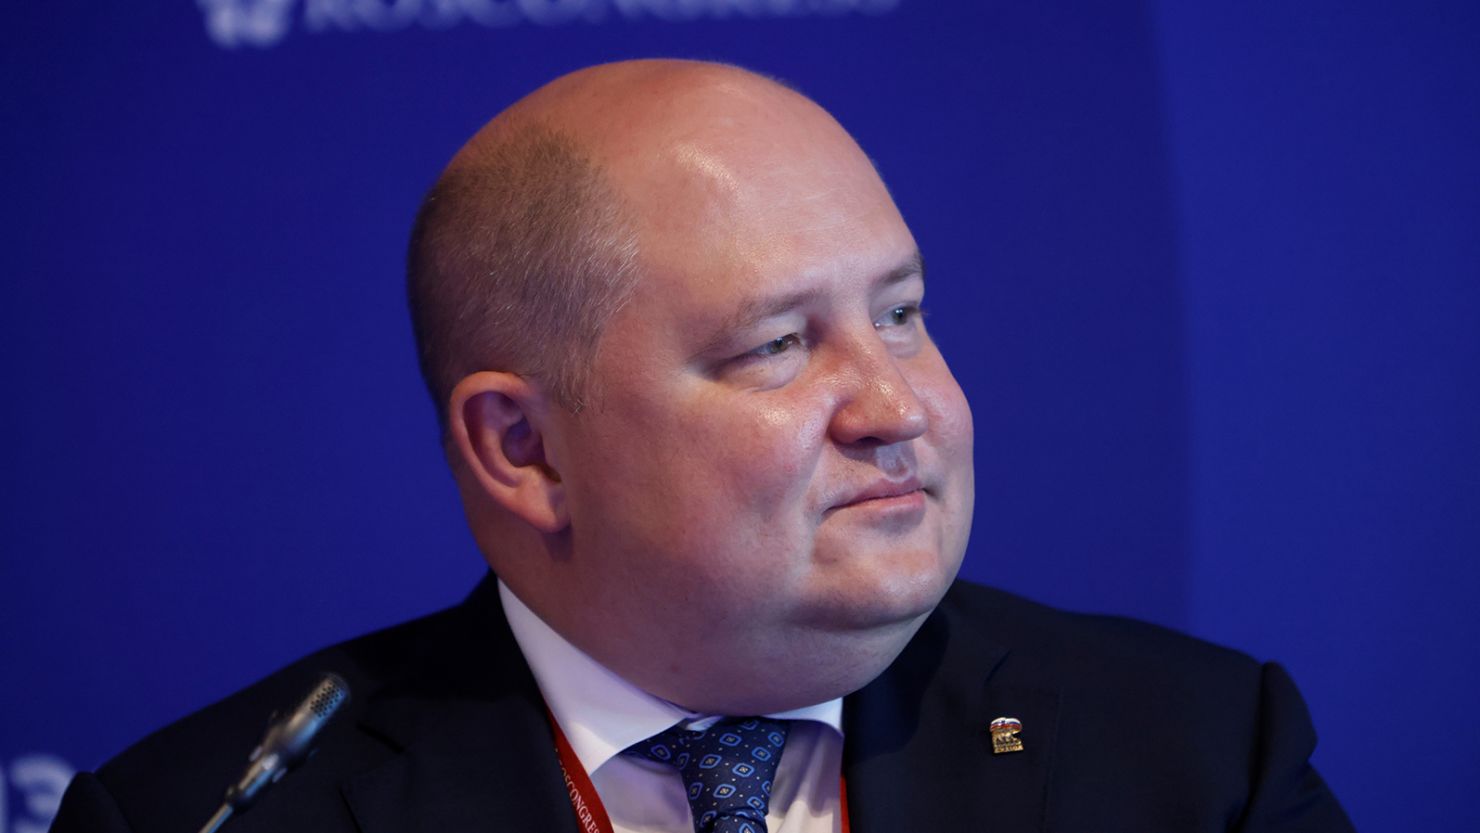 Governor of Sevastopol Mikhail Razvozhaev at a session of the St. Petersburg International Economic Forum in Russia on June 16, 2022. 